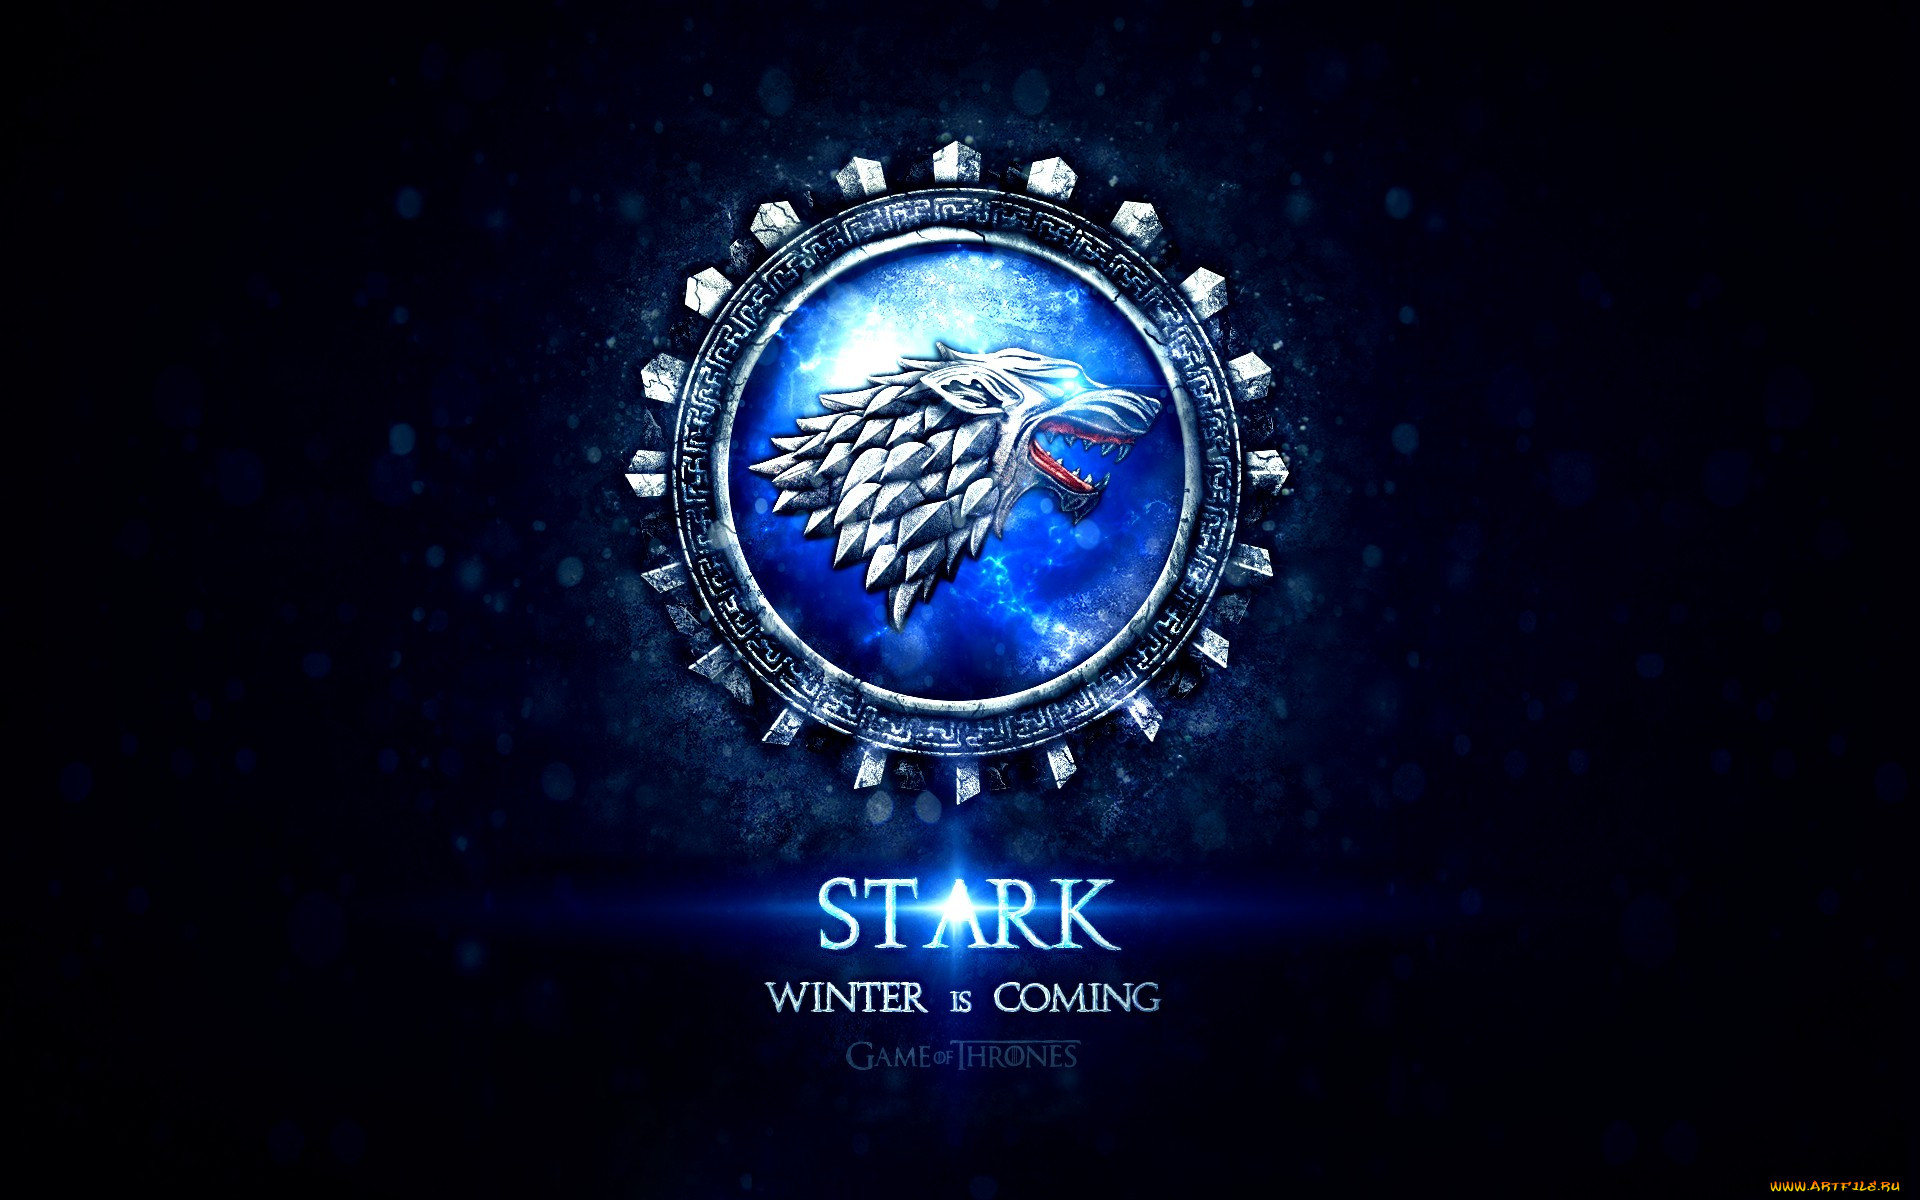  , game of thrones , , thrones, and, ice, of, a, song, , , , fire, game